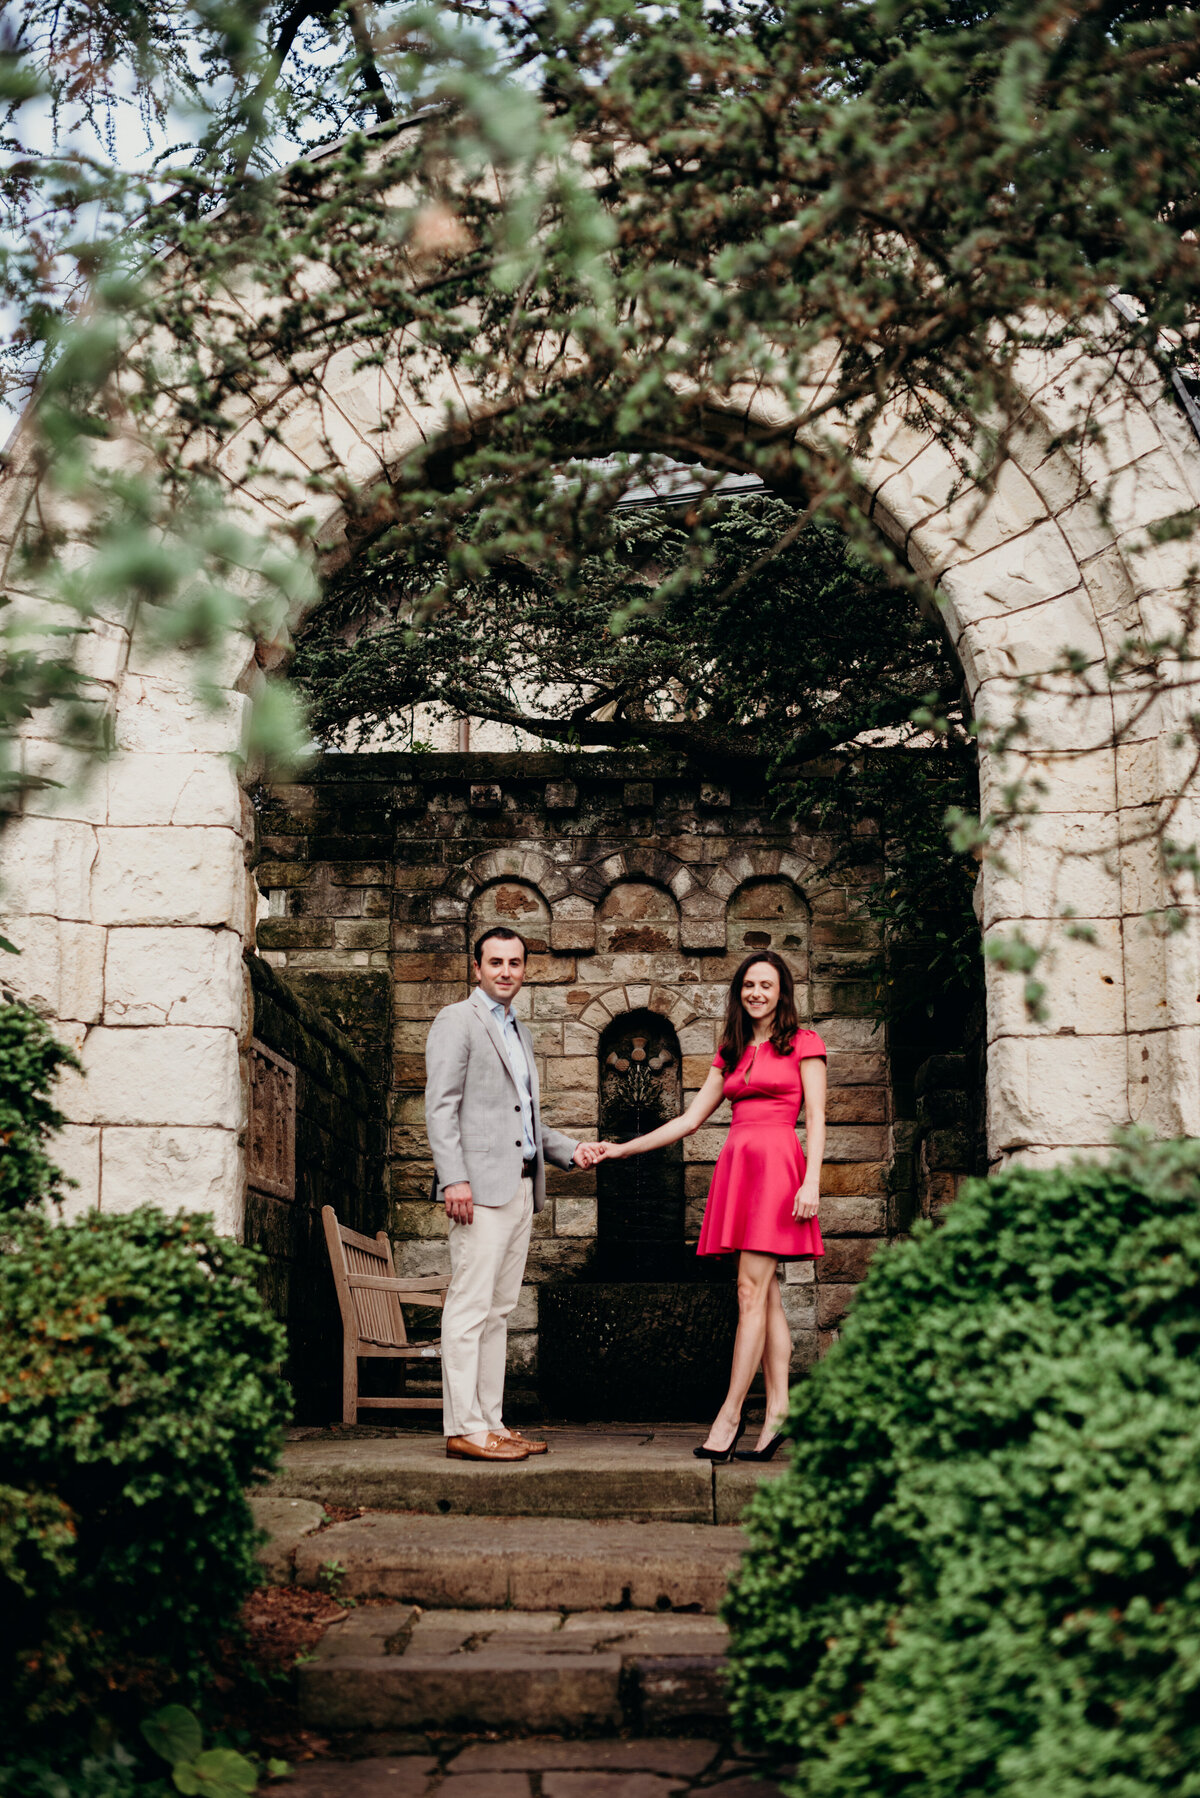 Lizzy-David-Engagement-CathedralHghts-16